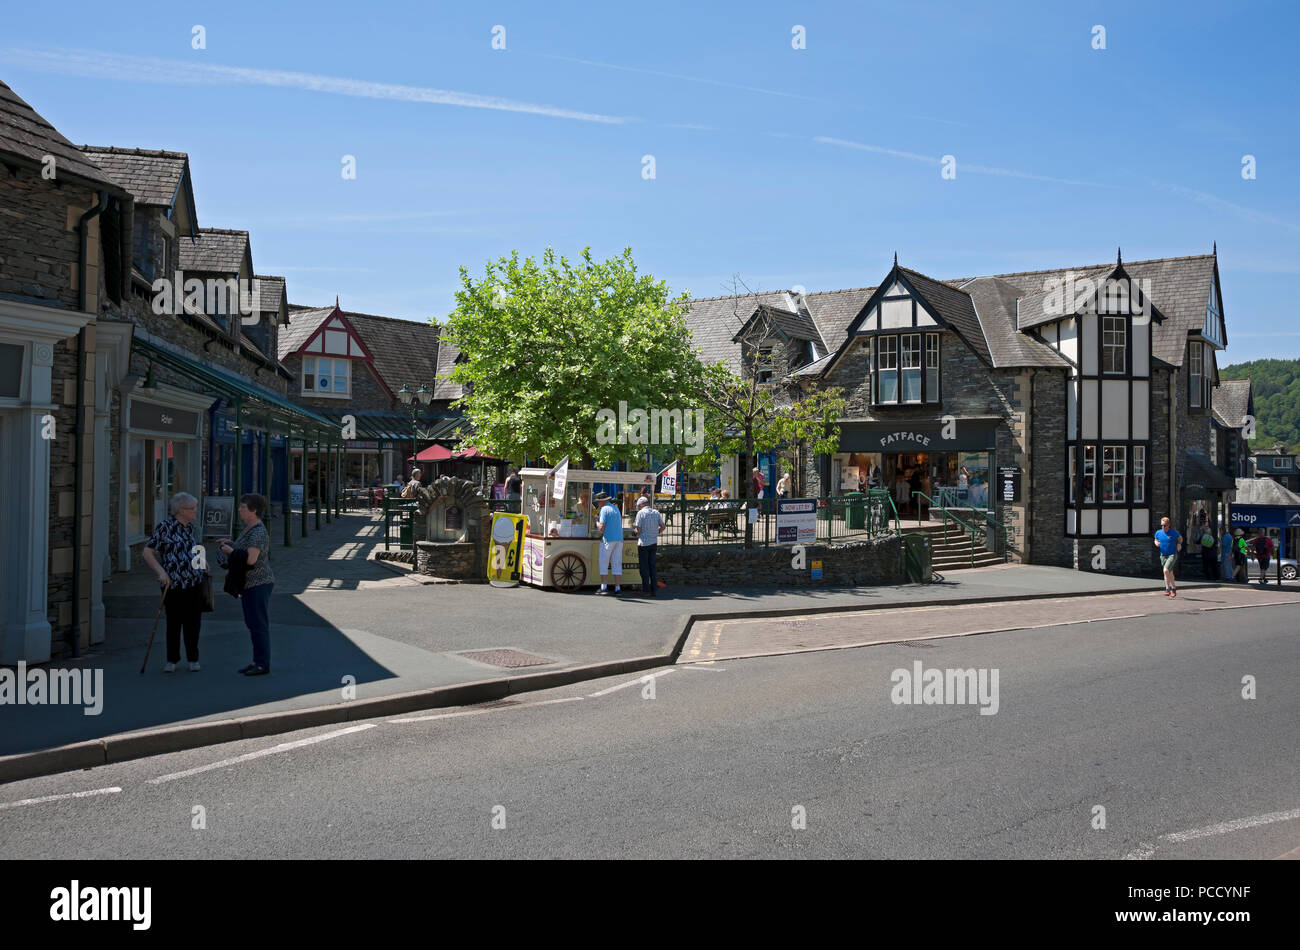 People tourists visitors in the town centre in summer Ambleside Cumbria England UK United Kingdom GB Great Britain Stock Photo